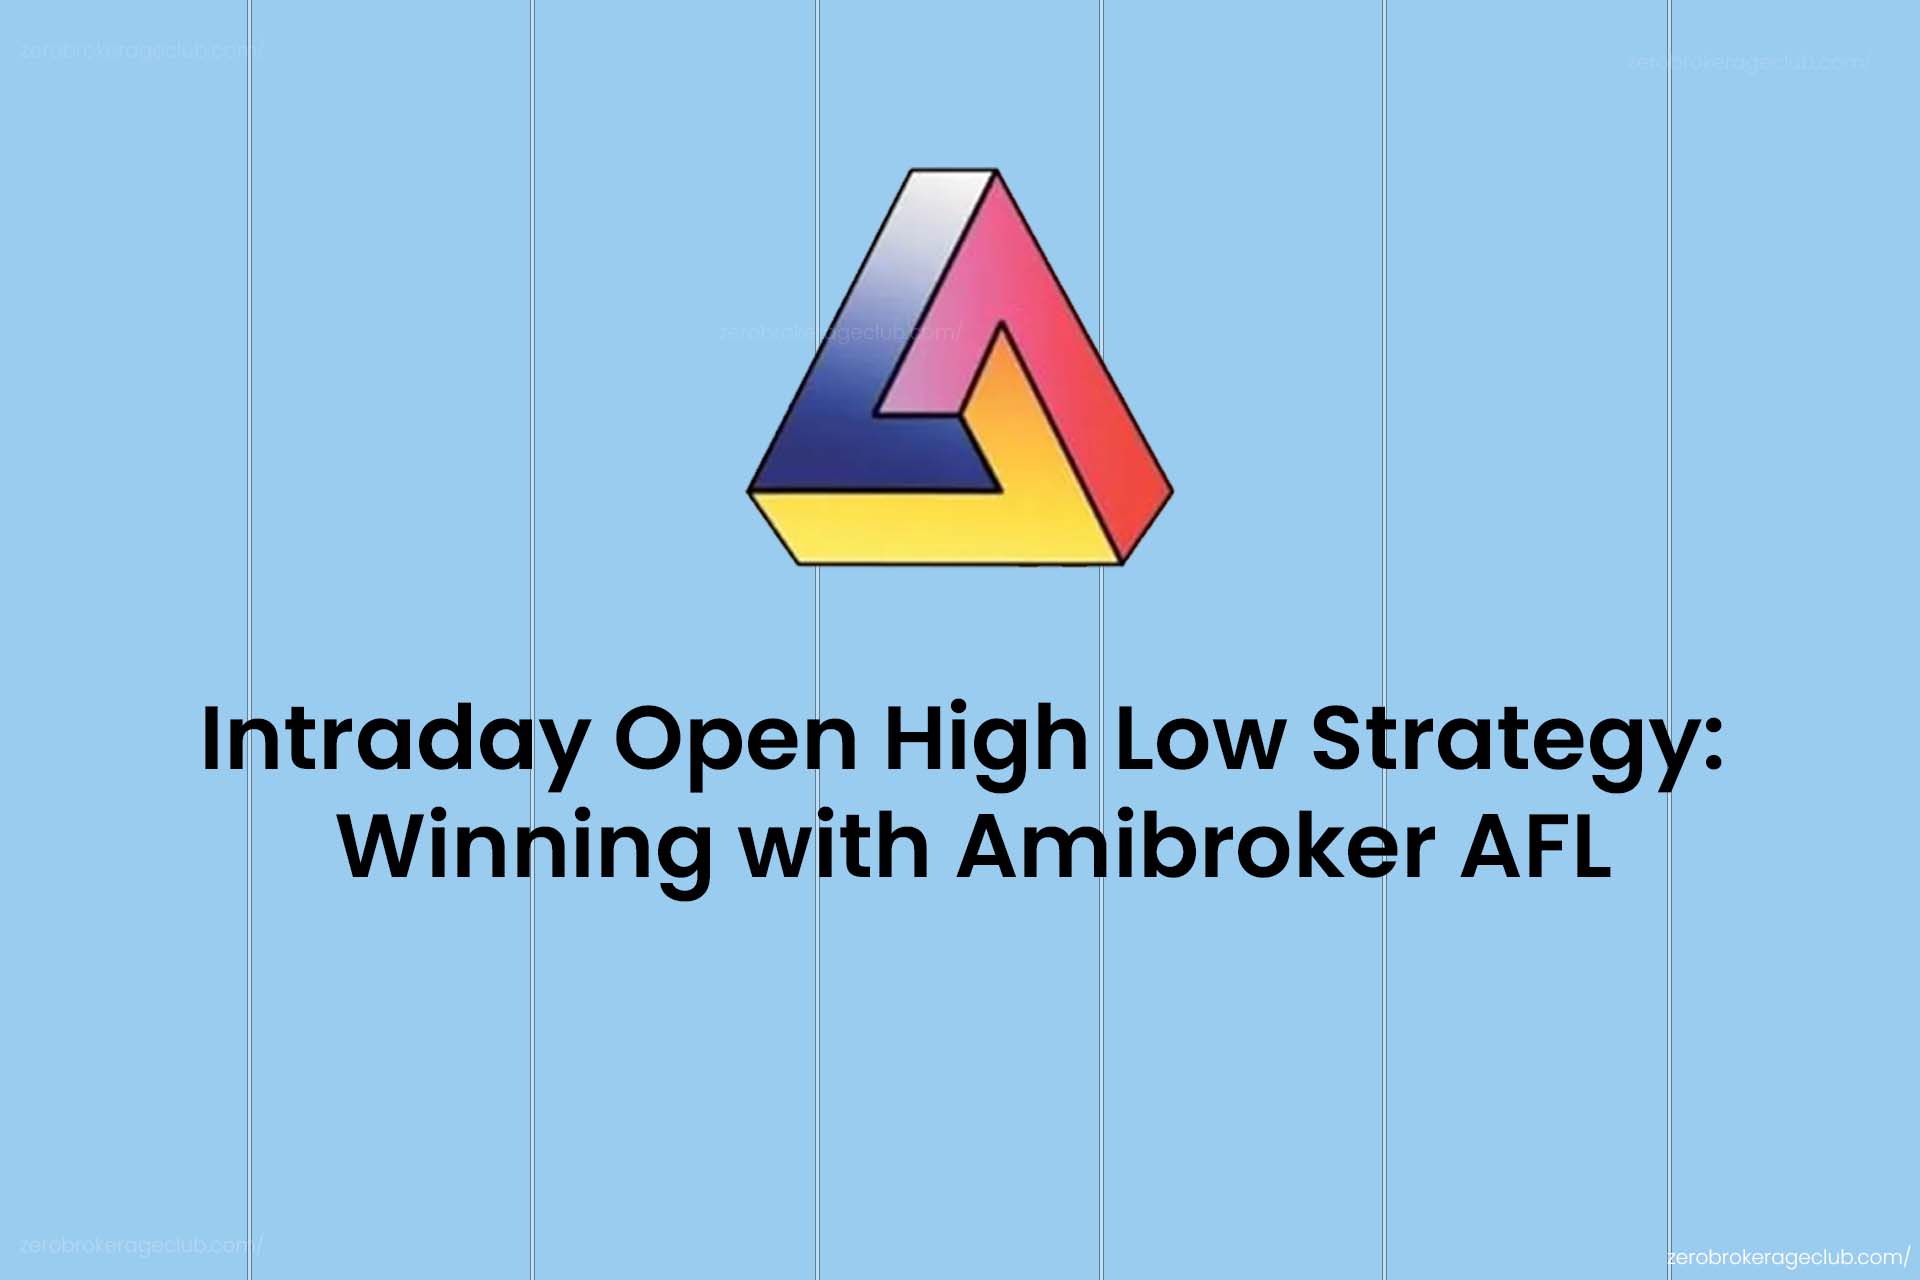 Intraday Open High Low Strategy: Winning with Amibroker AFL